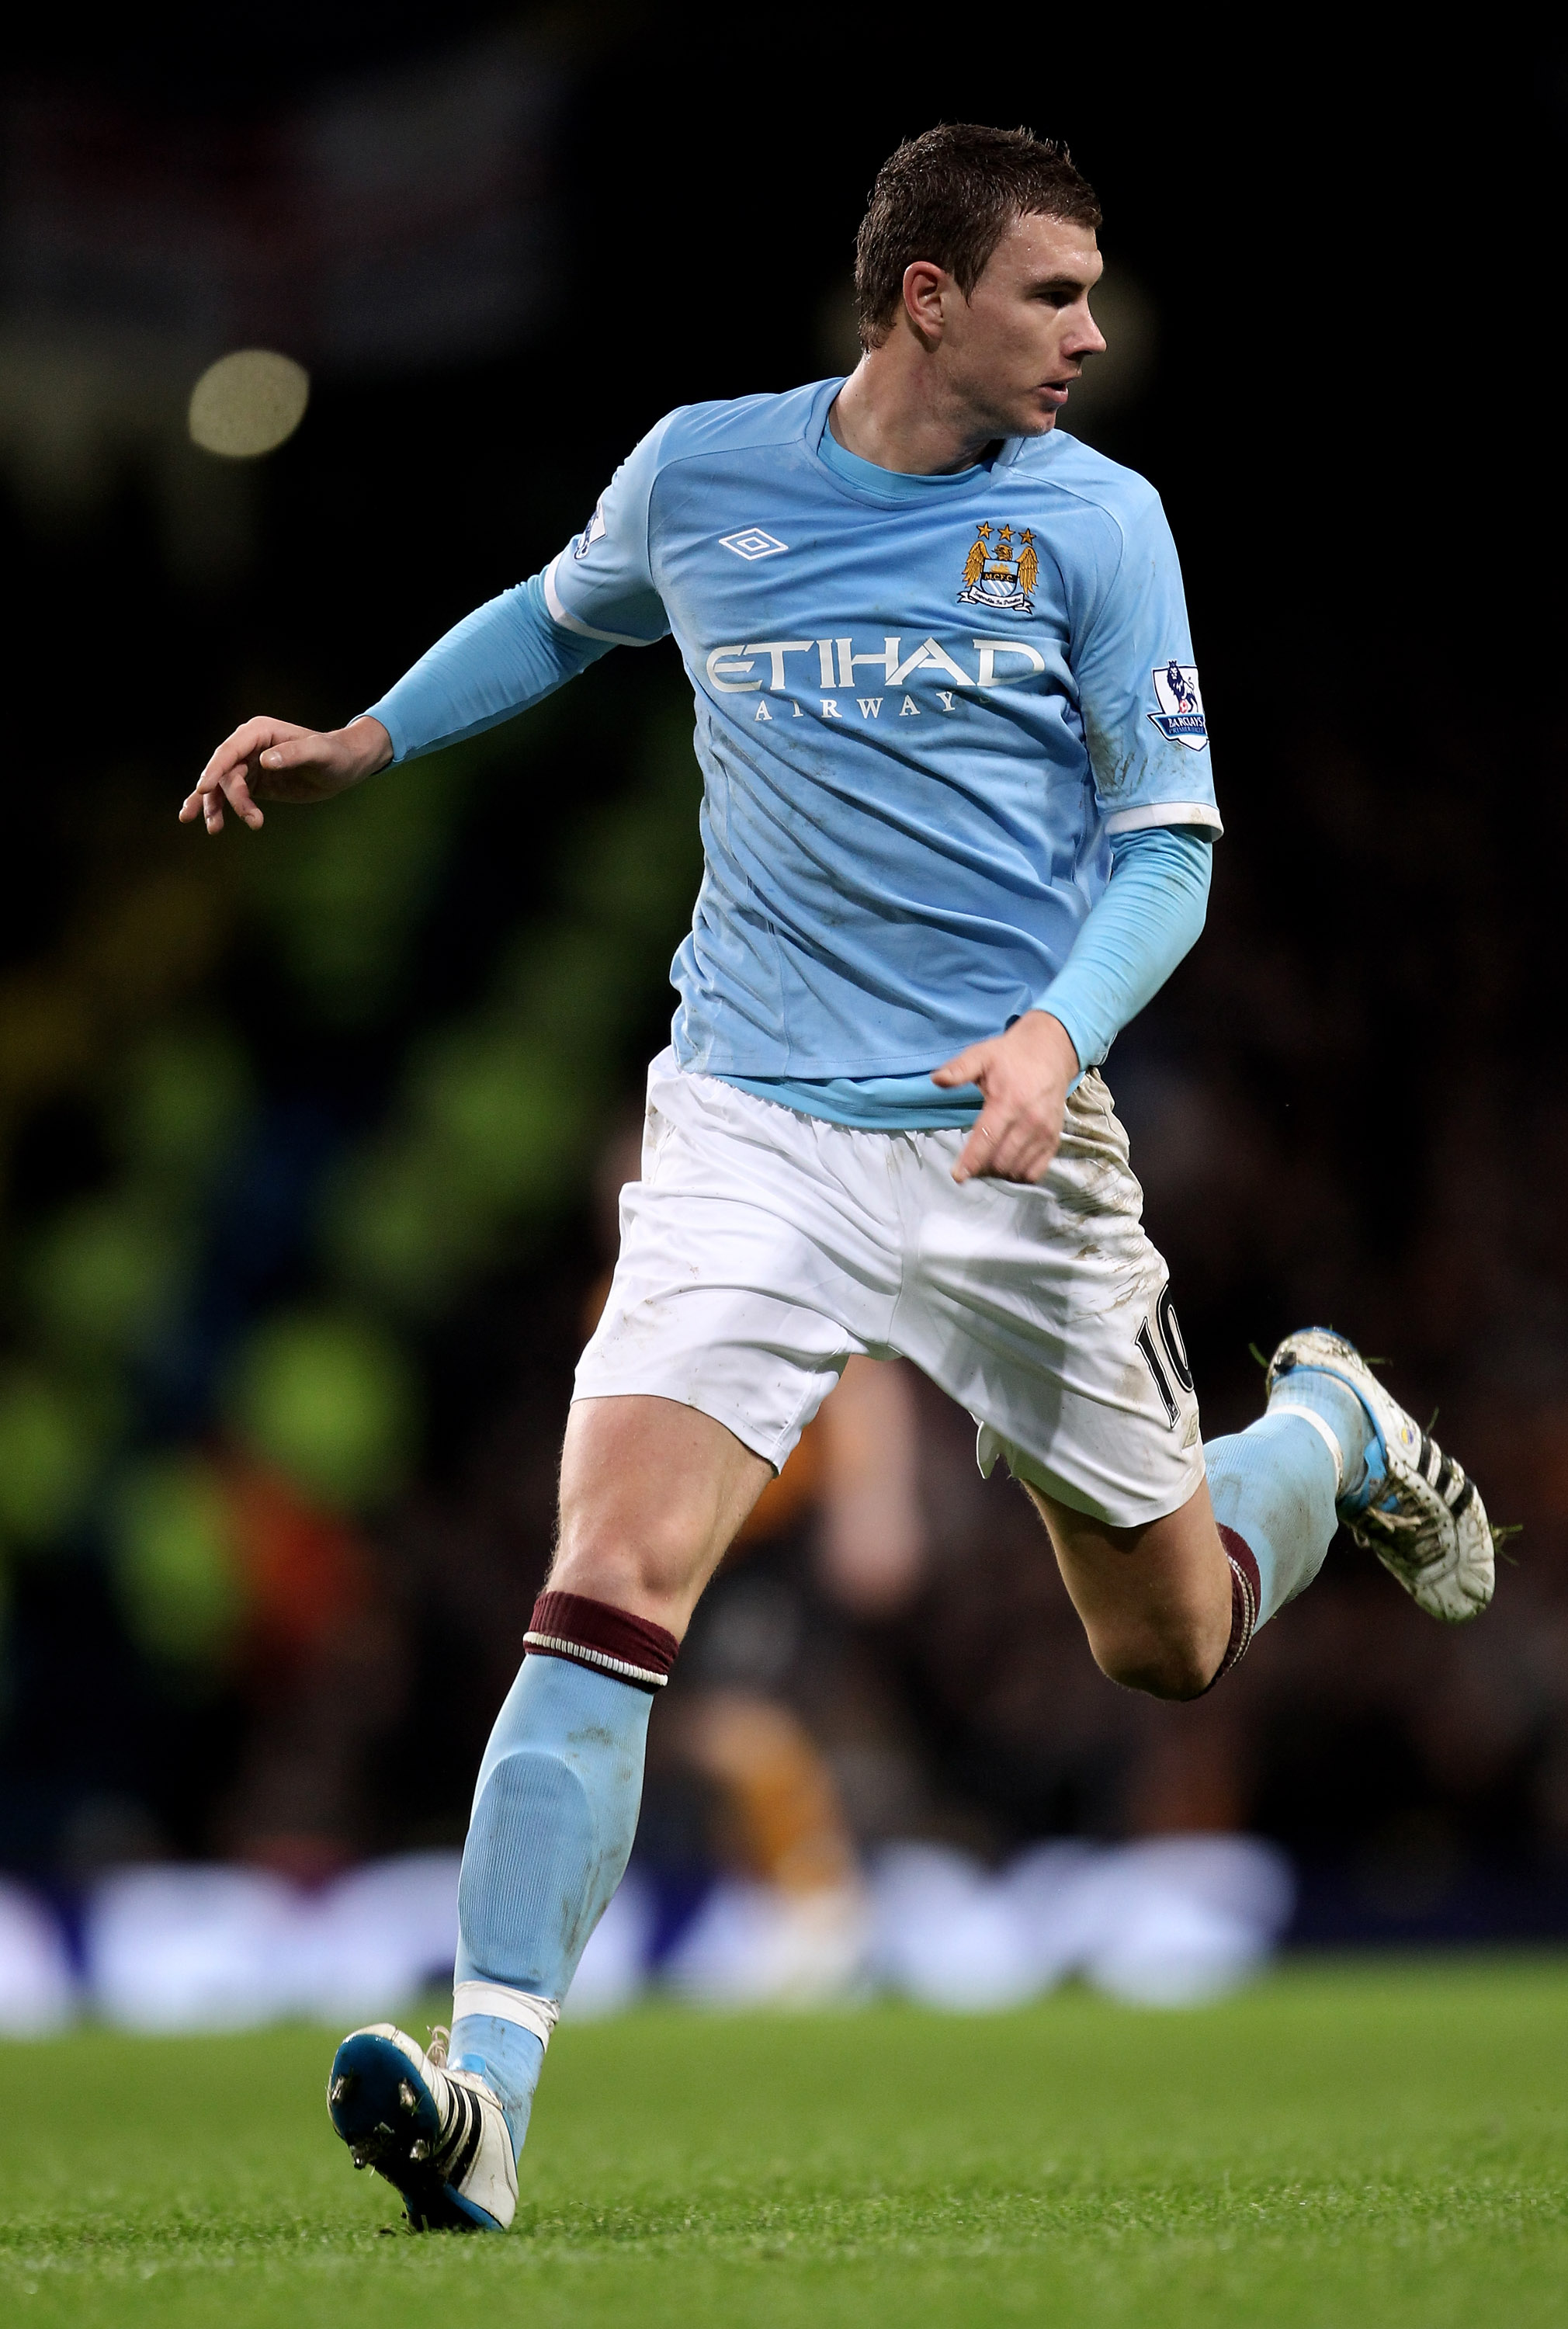 MANCHESTER, ENGLAND - JANUARY 15:  Edin Dzeko of Manchester City in action during the Barclays Premier League match between Manchester City and Wolverhampton Wanderers at the City of Manchester Stadium on January 15, 2011 in Manchester, England.  (Photo b